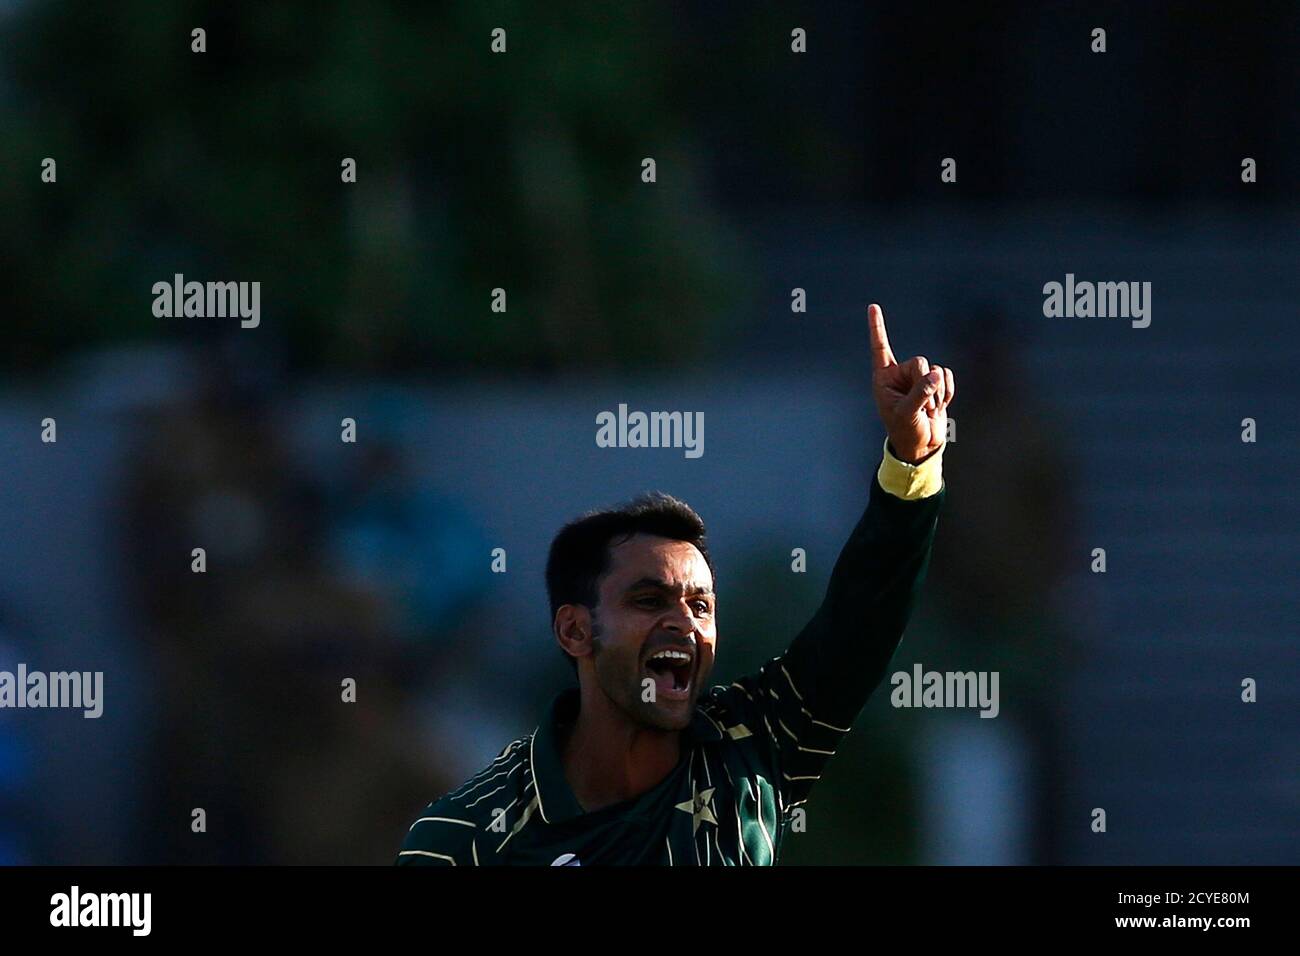 Pakistan's Mohammad Hafeez appeals for a successful wicket for Sri Lanka's Ashan Priyanjan (not pictured) during their second one day international (ODI) cricket match in Hambantota August 26, 2014. REUTERS/Dinuka Liyanawatte (SRI LANKA - Tags: SPORT CRICKET) Stock Photo